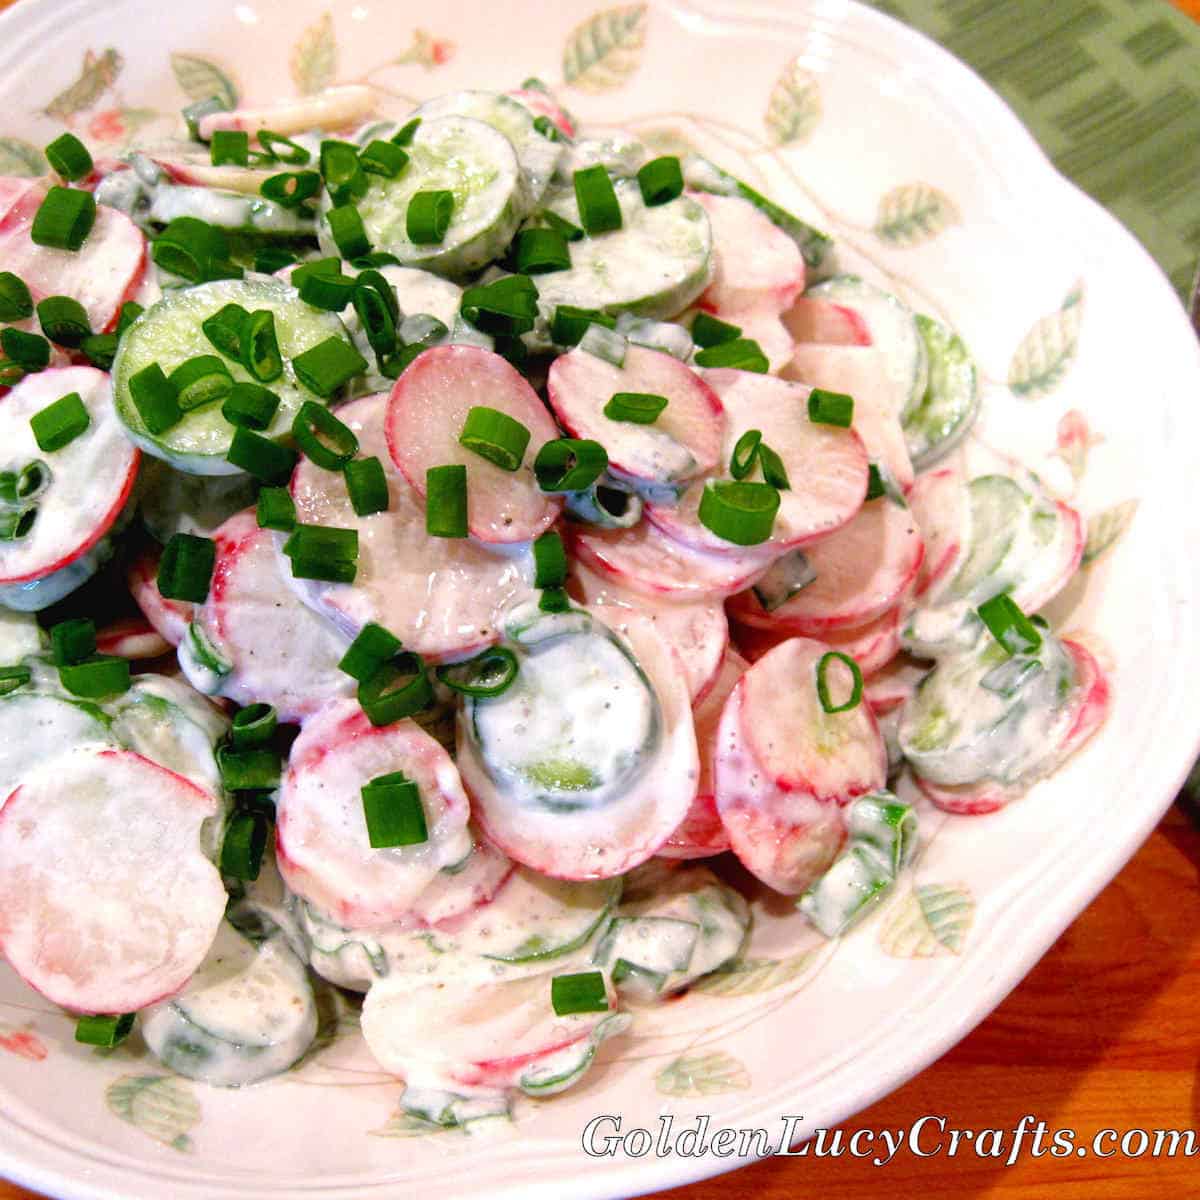 Salad made of radishes, cucumbers and green onions.